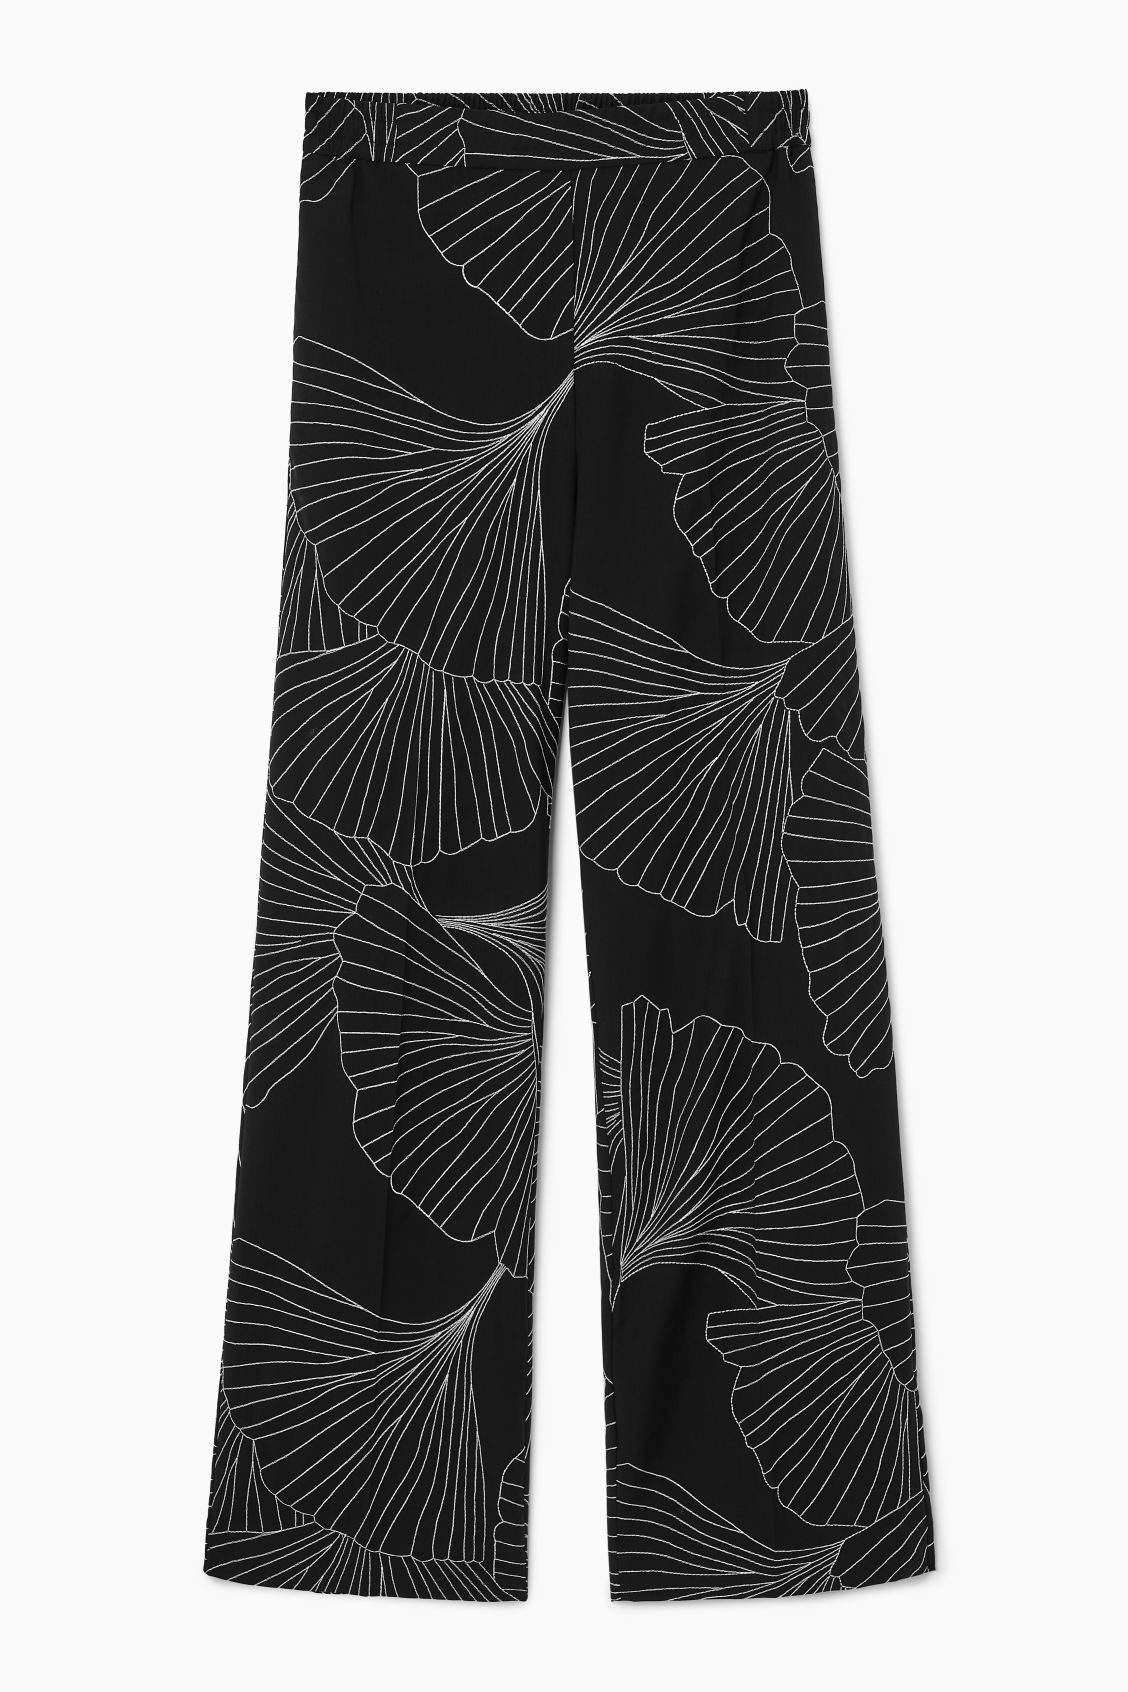 EMBROIDERED WOOL TROUSERS - BLACK / FLORAL - COS | COS UK